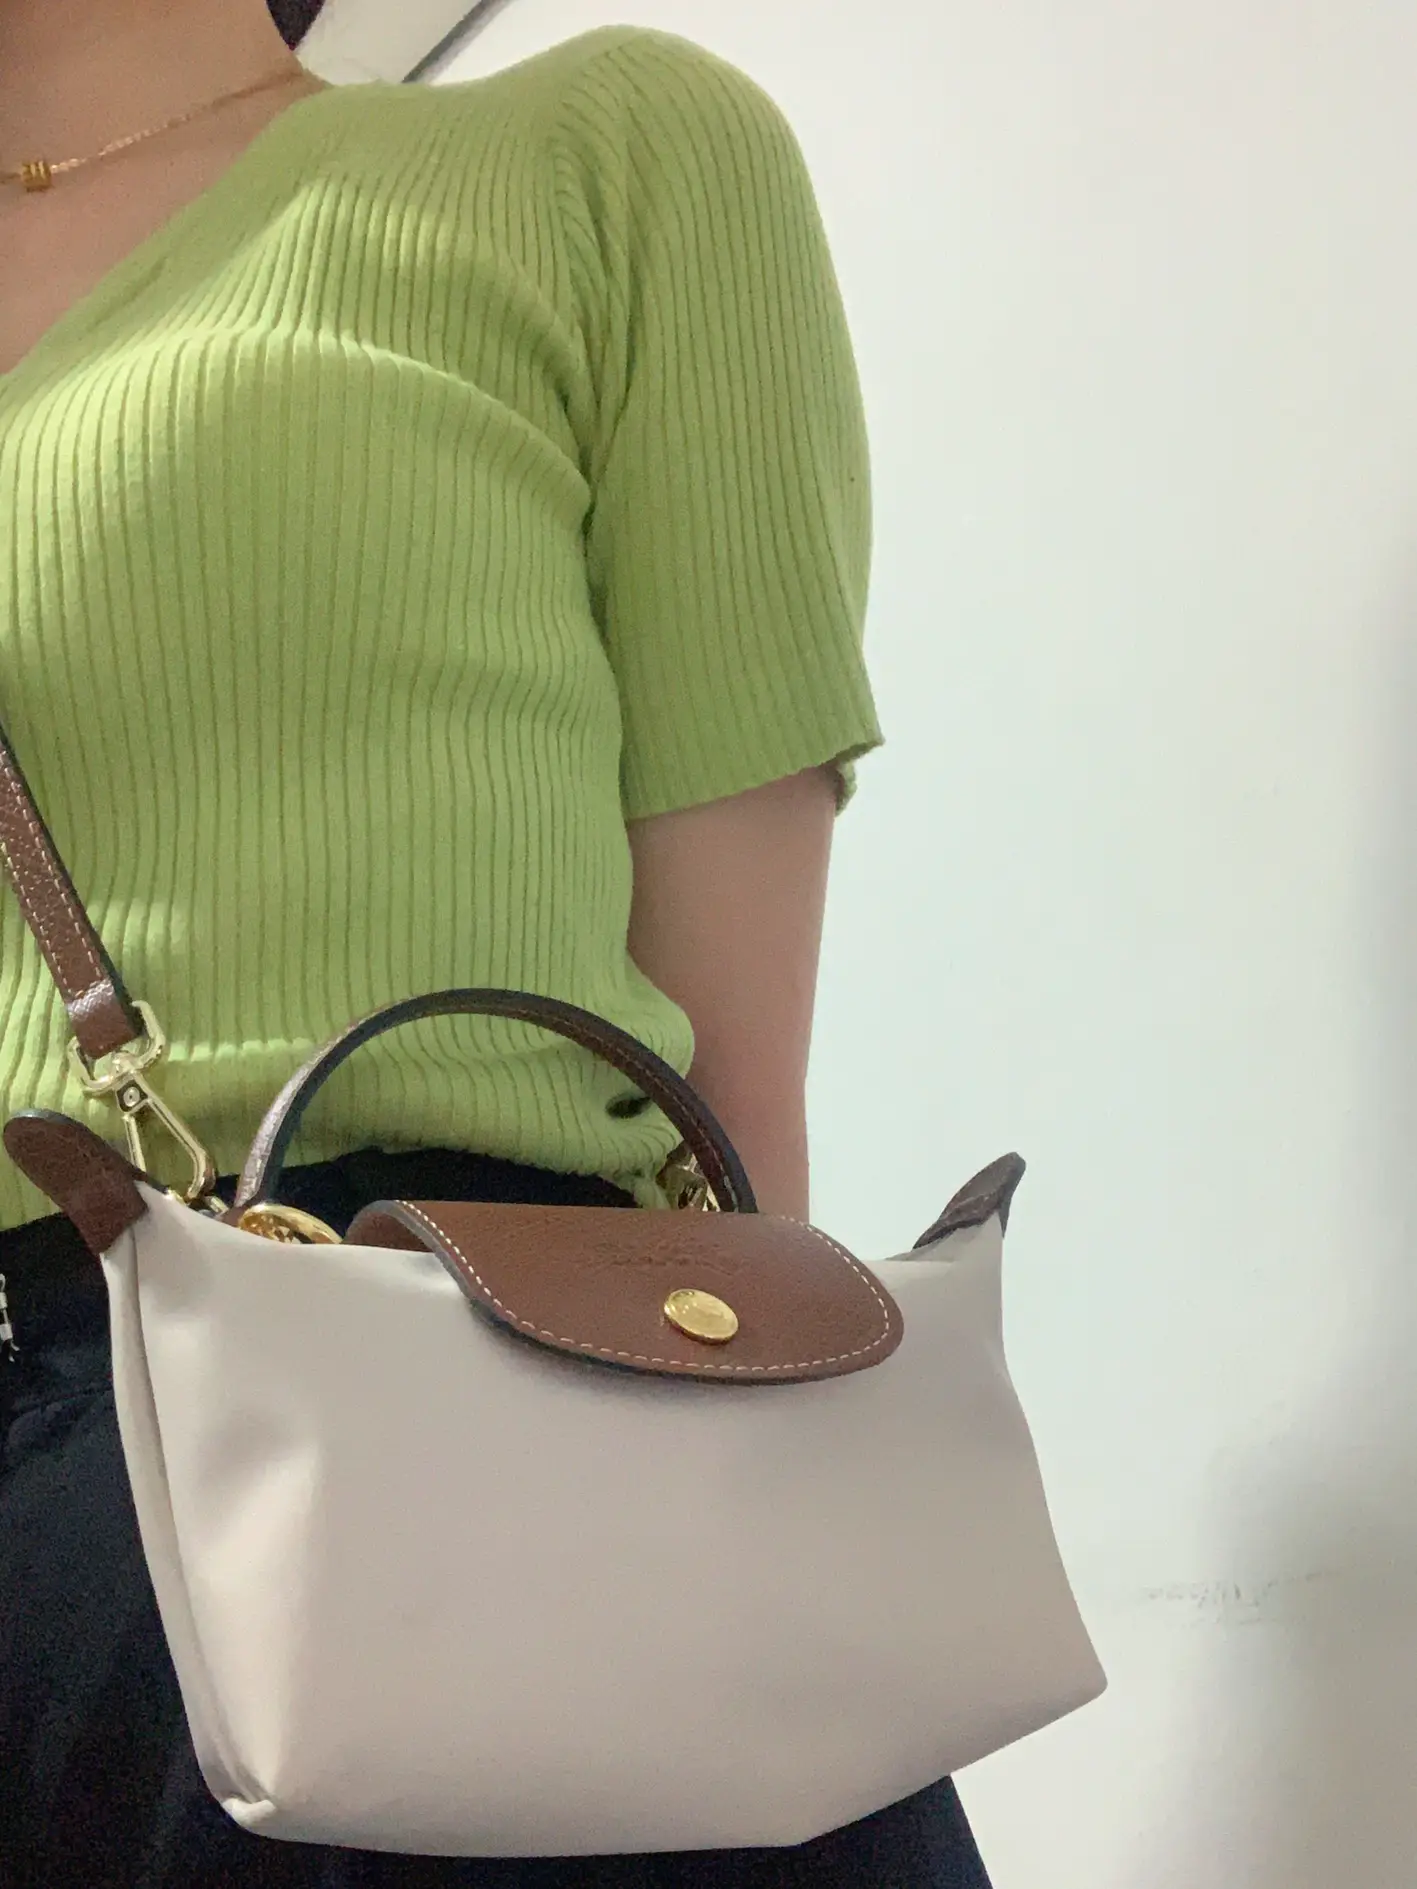 GETTING THE VIRAL MINI LONGCHAMP? 💼💸, Gallery posted by germaine 🪷